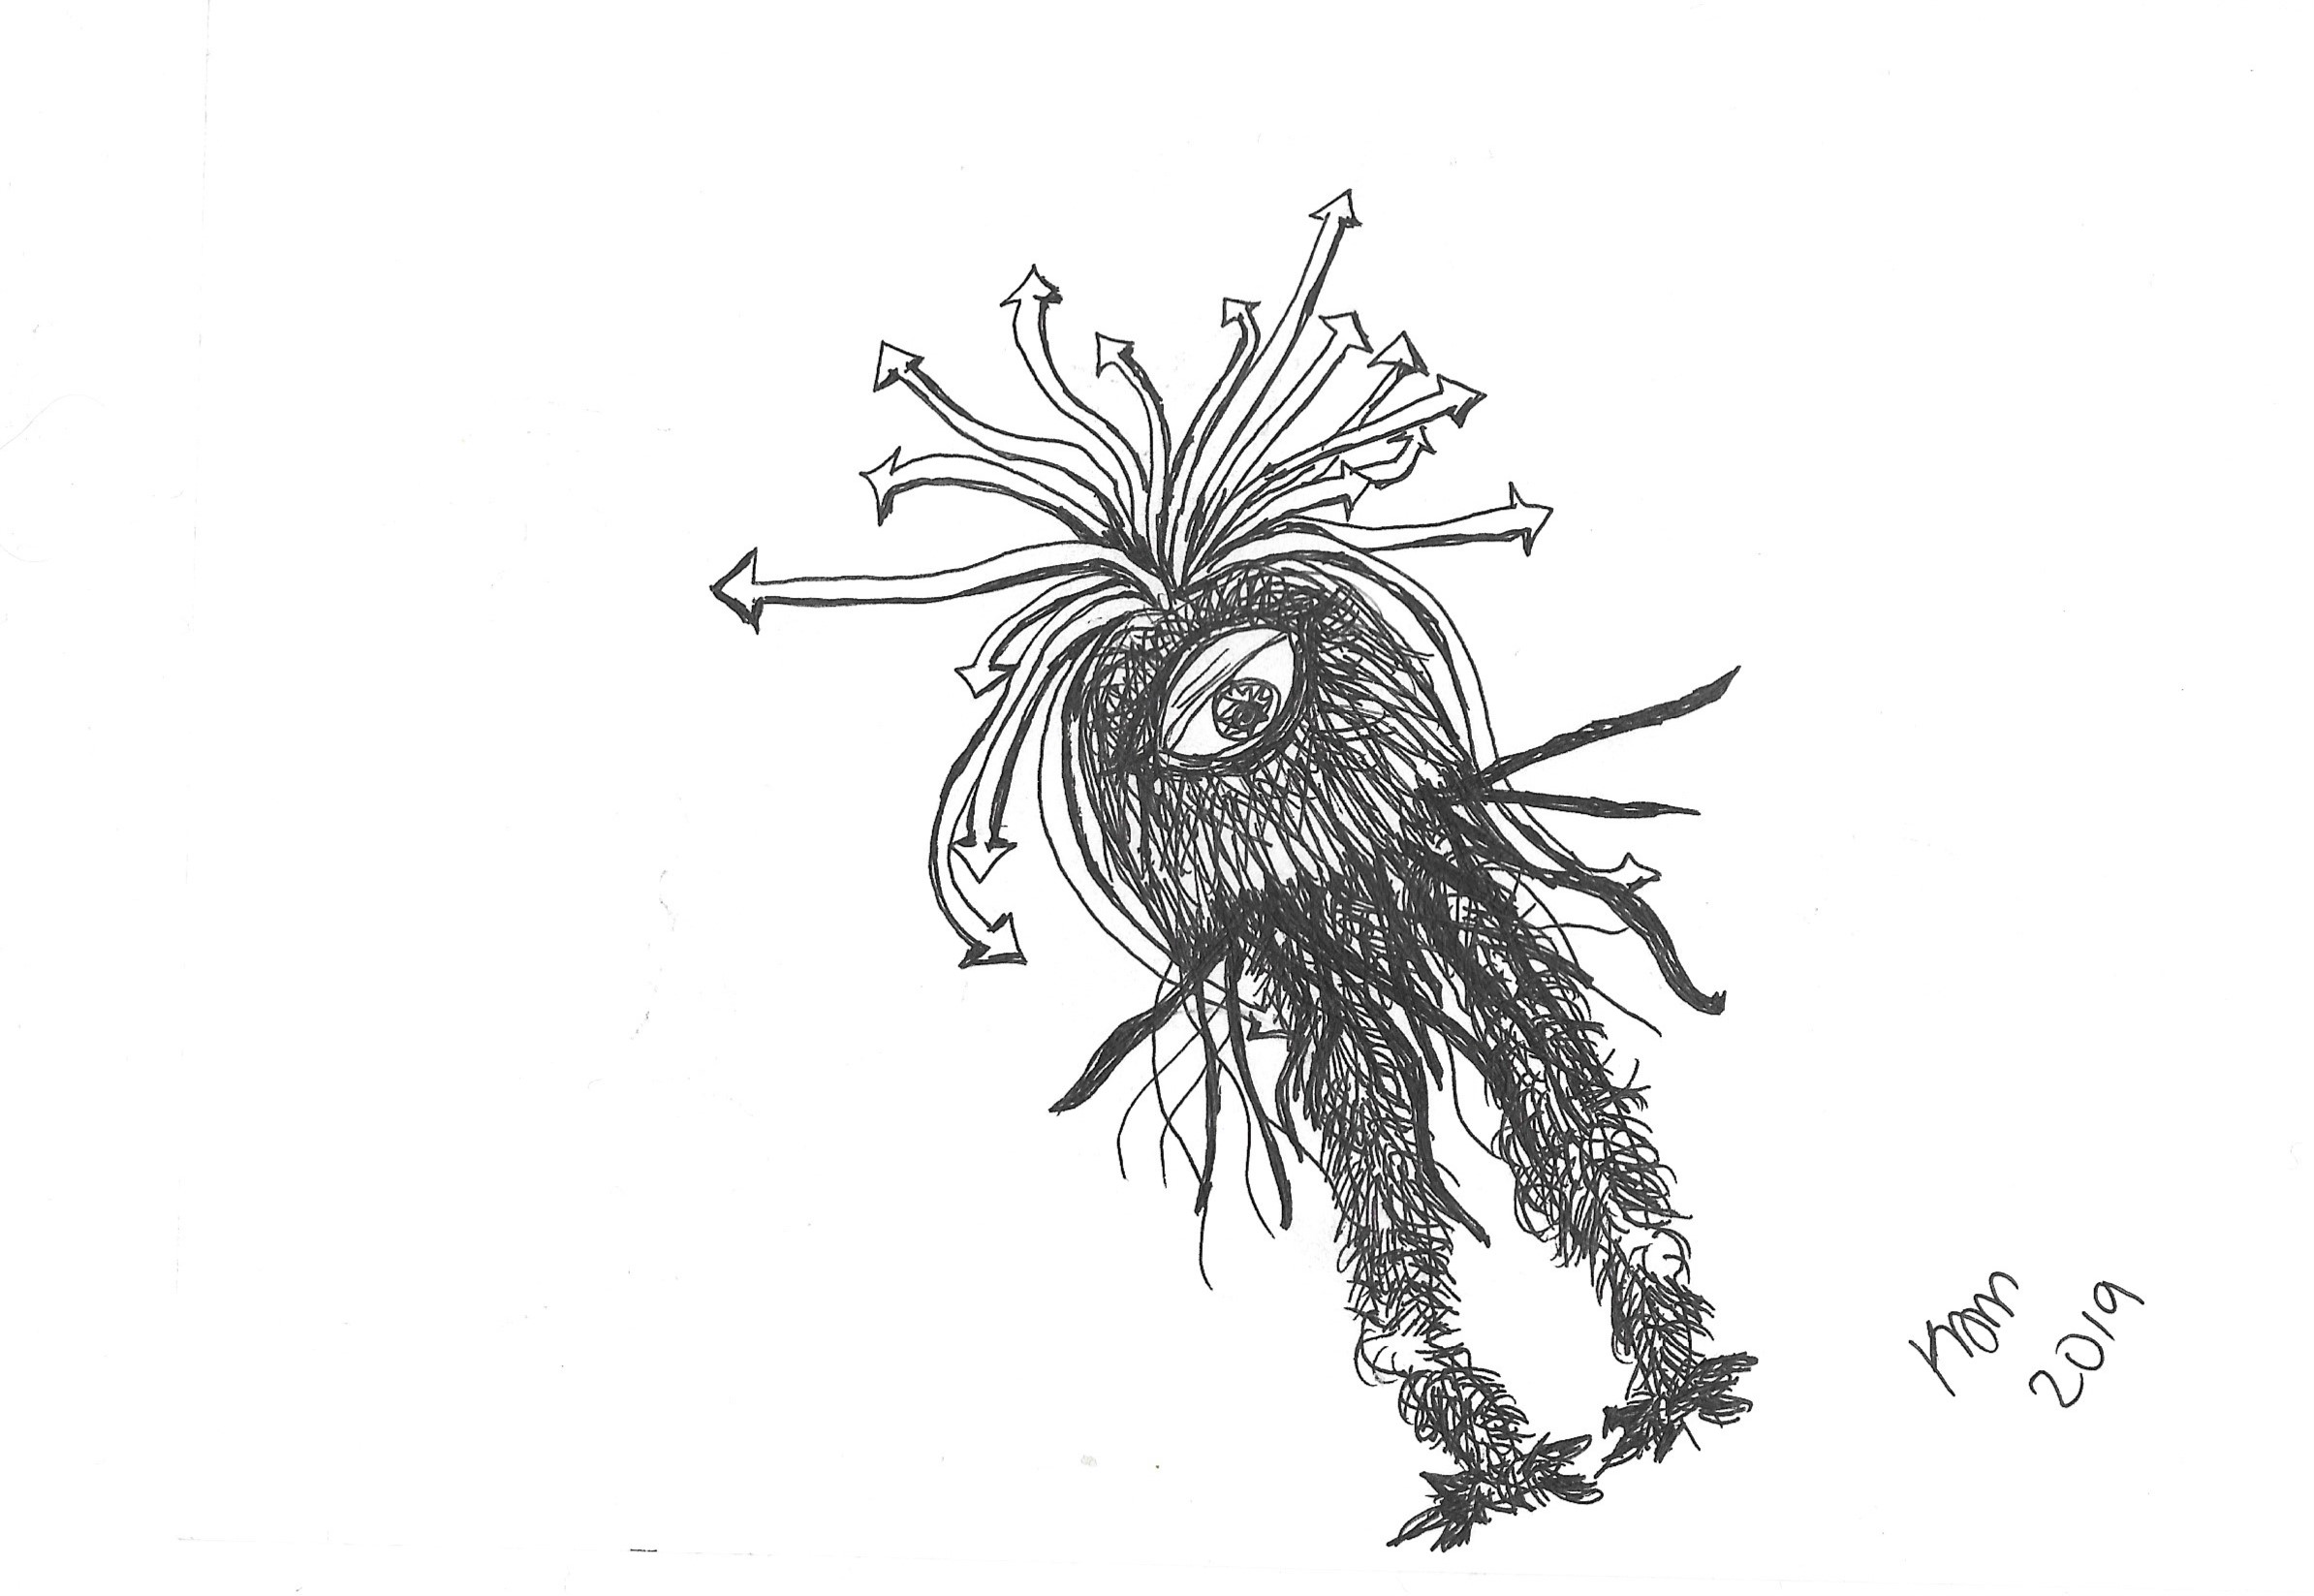 a bipedal cyclopian monster with hair tendrils in the shape of arrows on its head sticking out every which way. Covered in wiry little hairs except for its two knobbly knees.